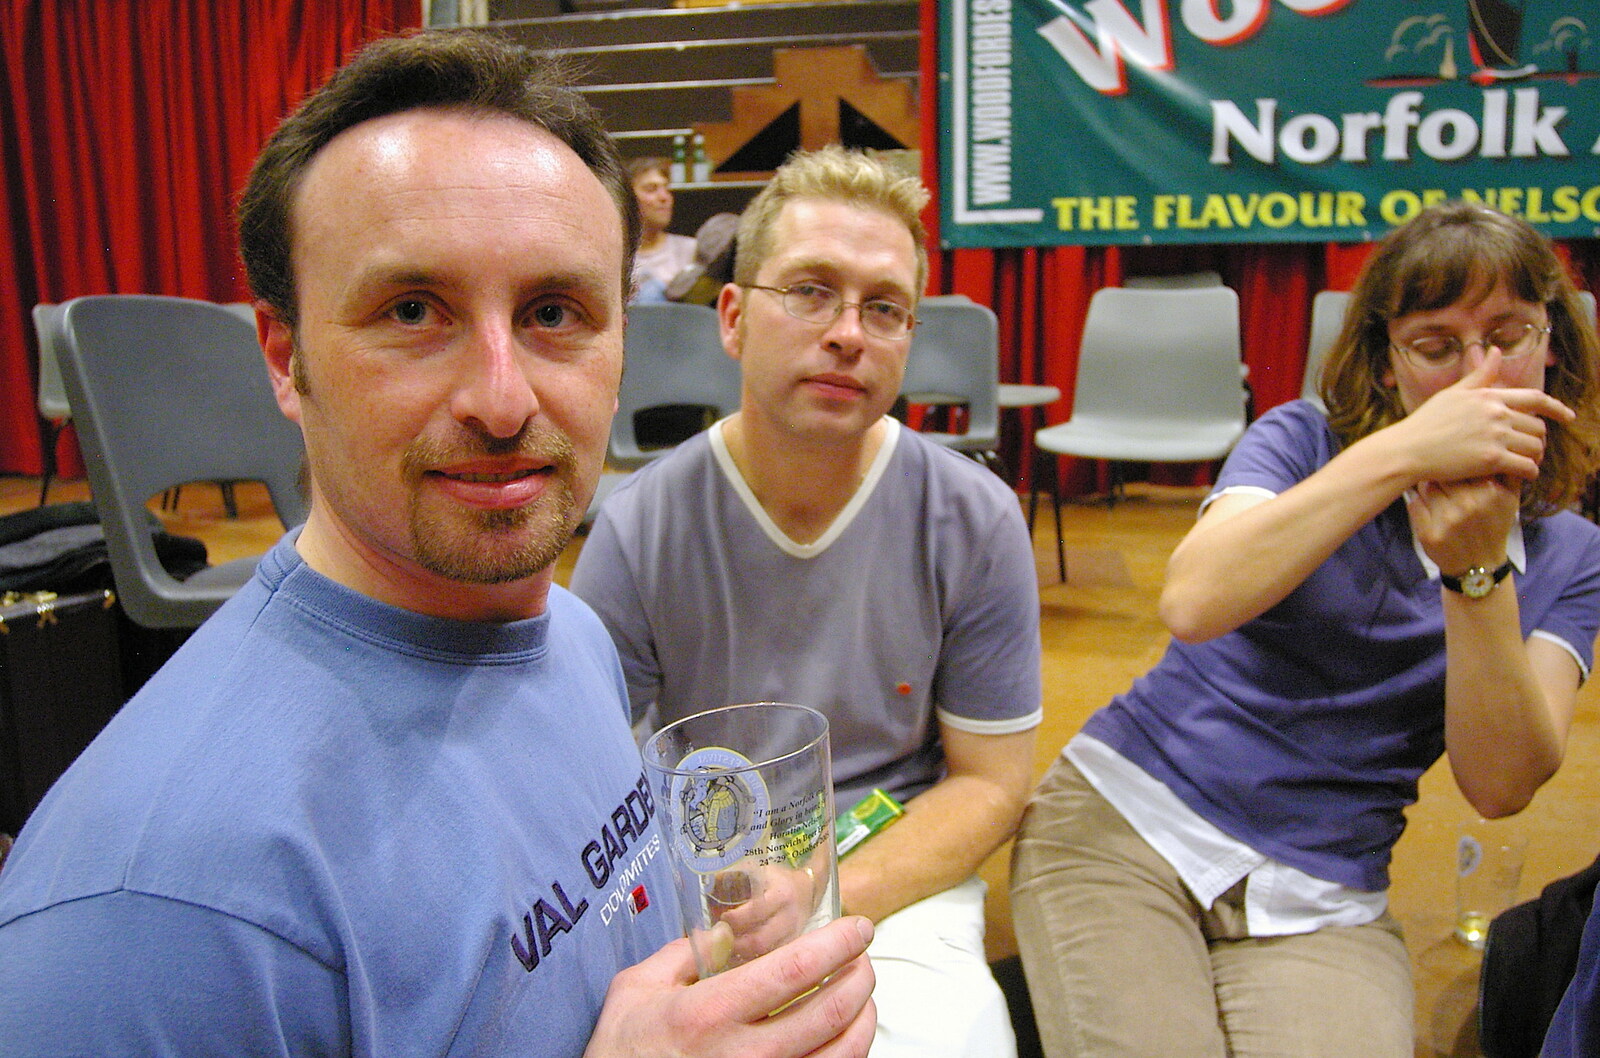 Dave, Marc and Suey from The 28th Norwich Beer Festival, St. Andrew's Hall, Norwich - 26th October 2005